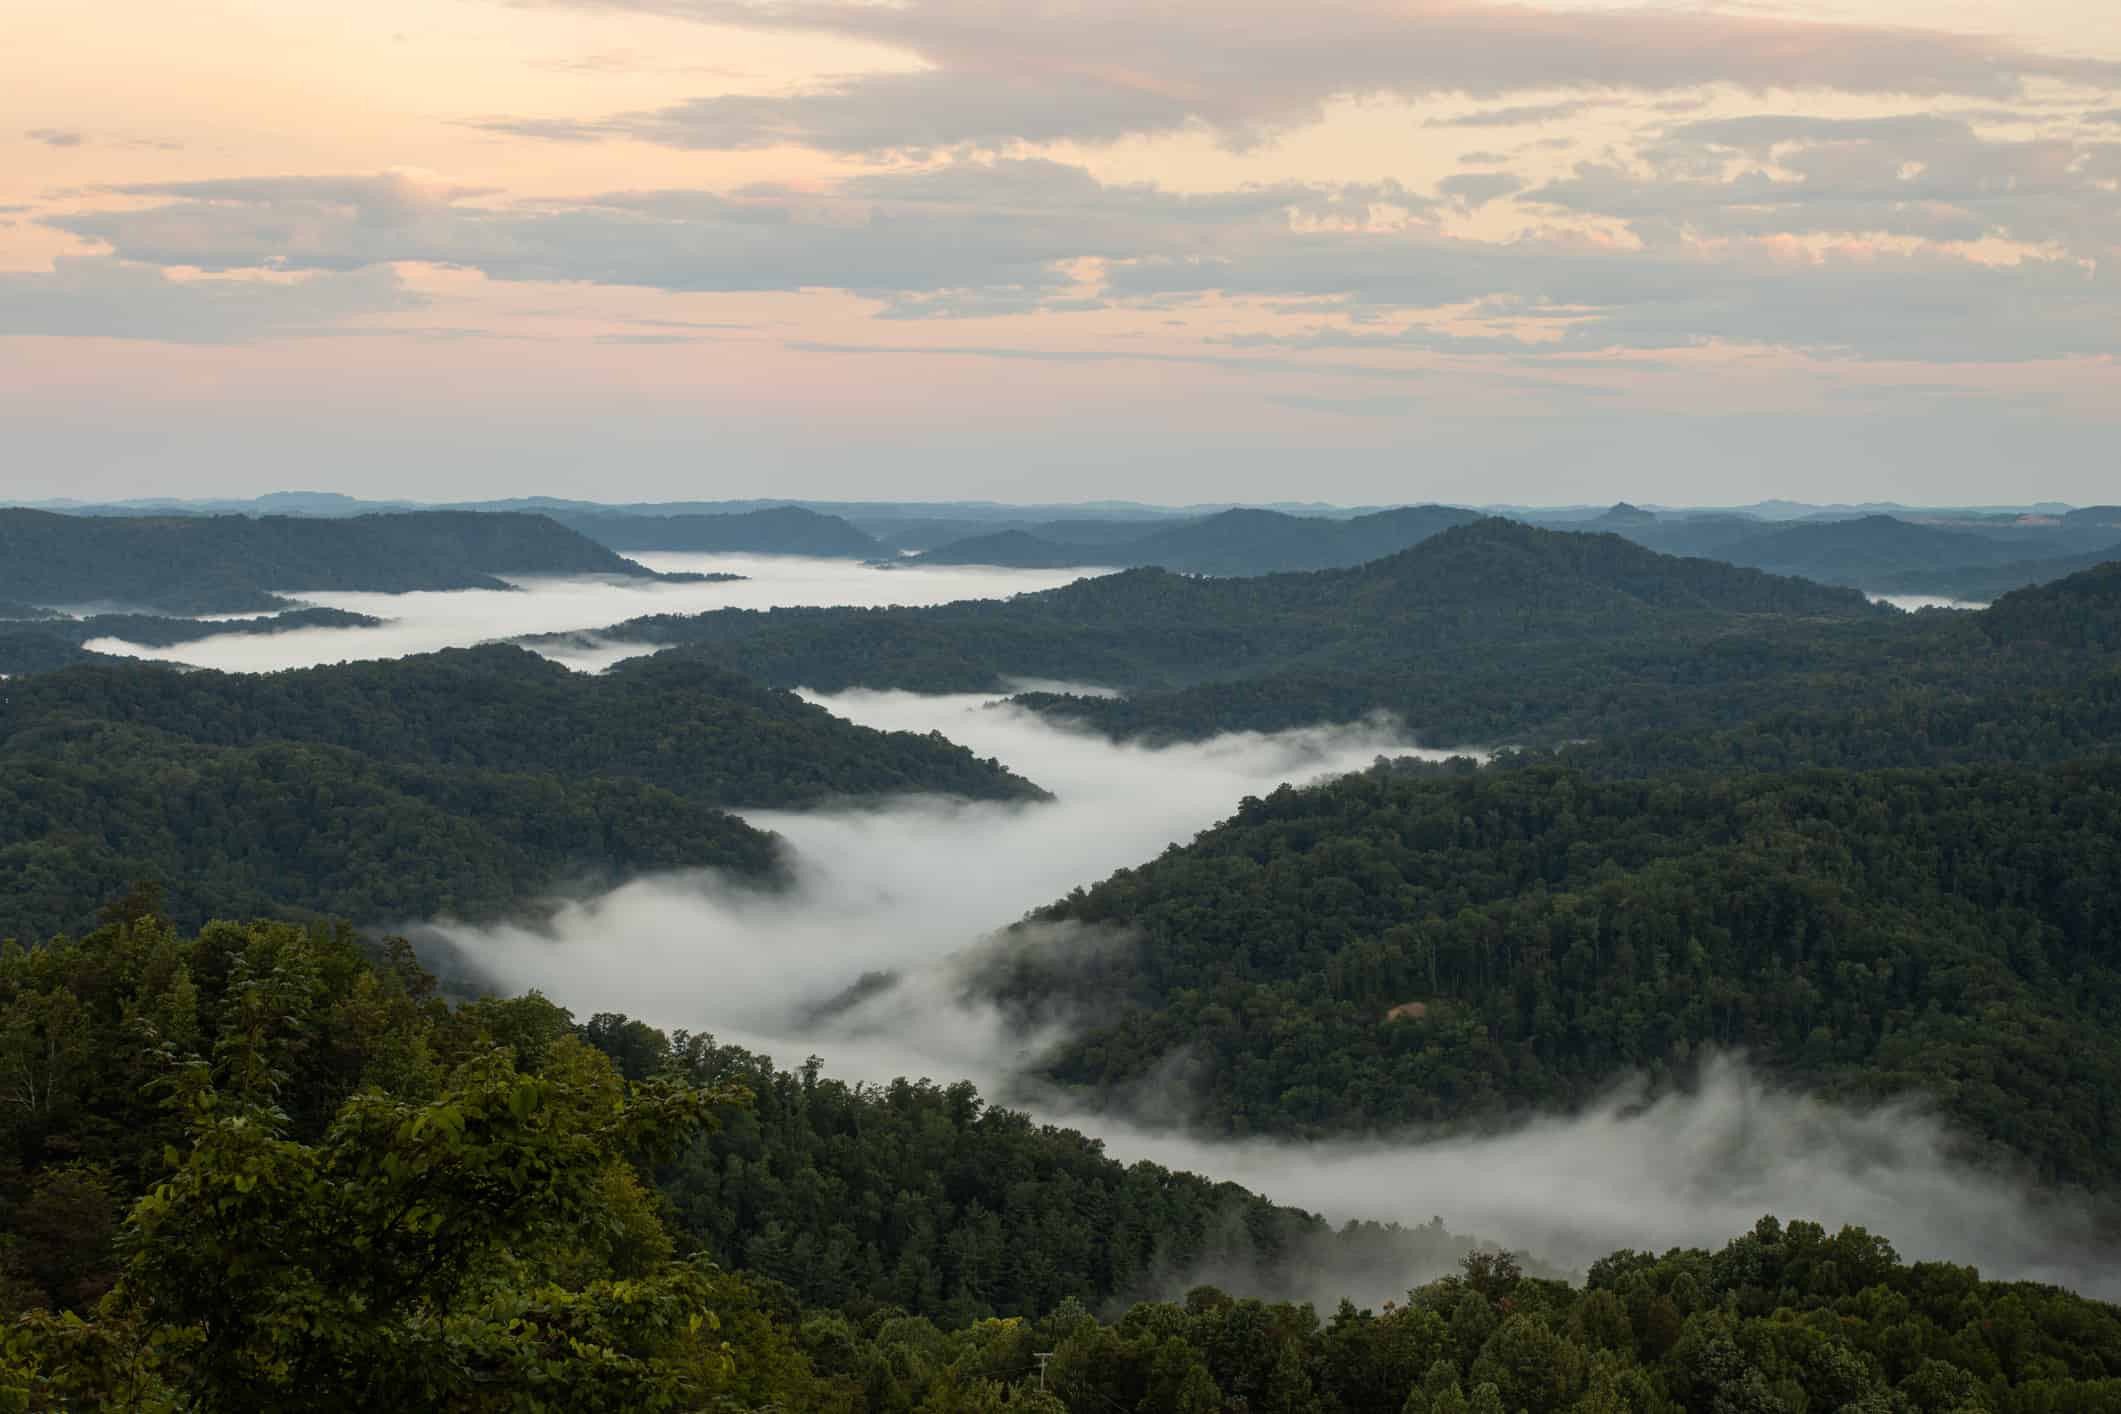 Early morning fog hovers in the valleys in Central Appalachia.